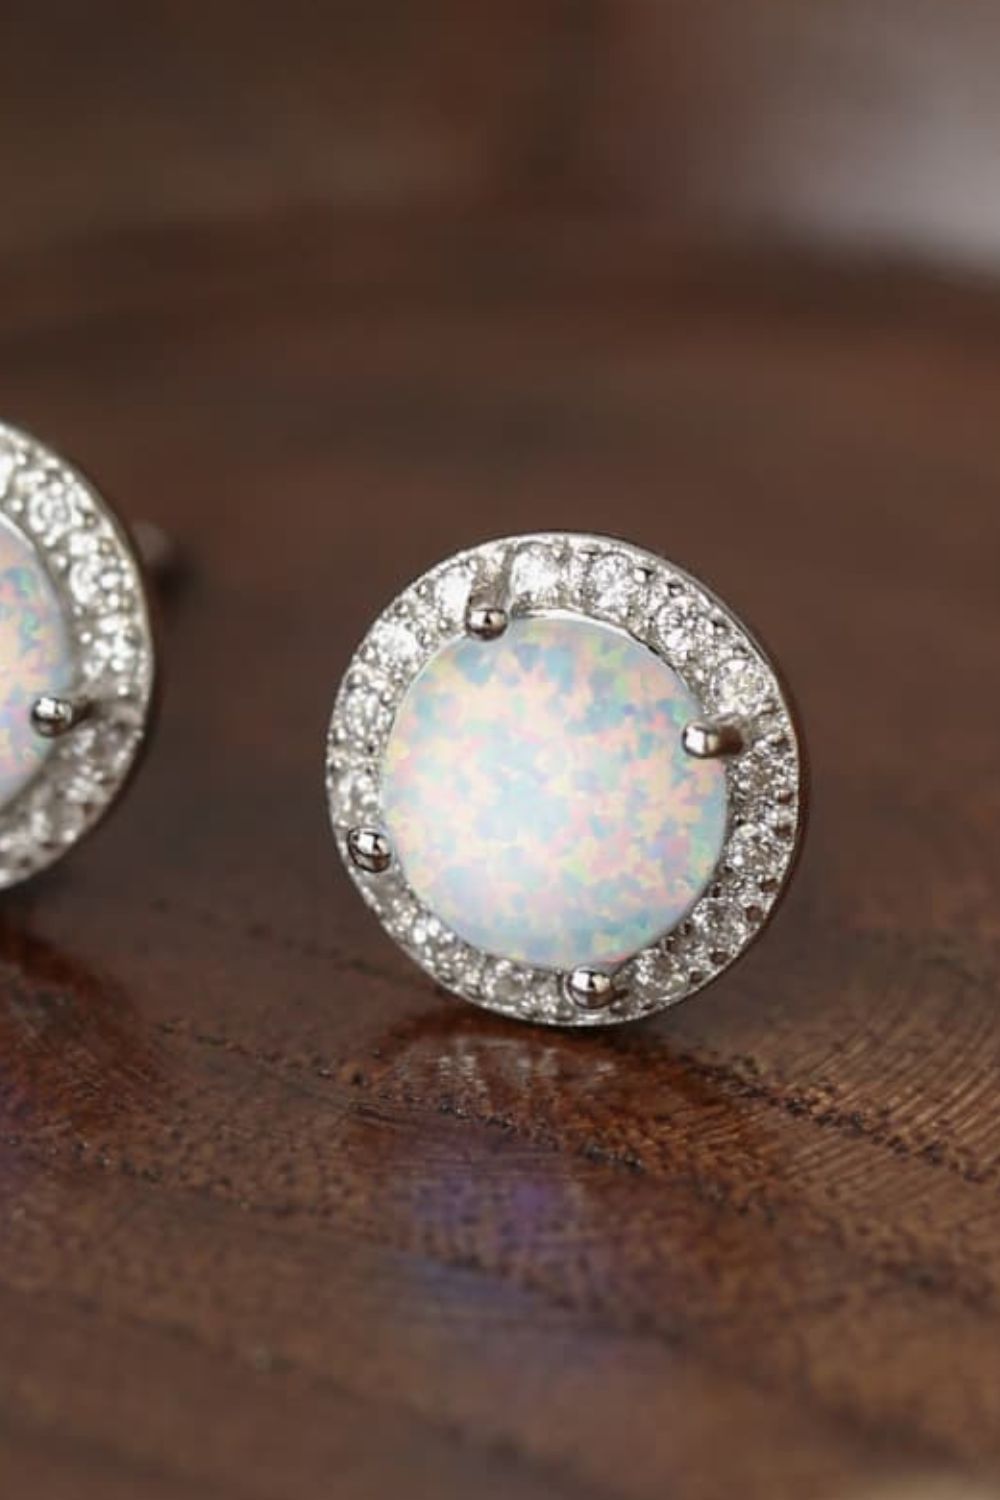 925 Sterling Silver Platinum-Plated Opal Round Stud Earrings-Ever Joy